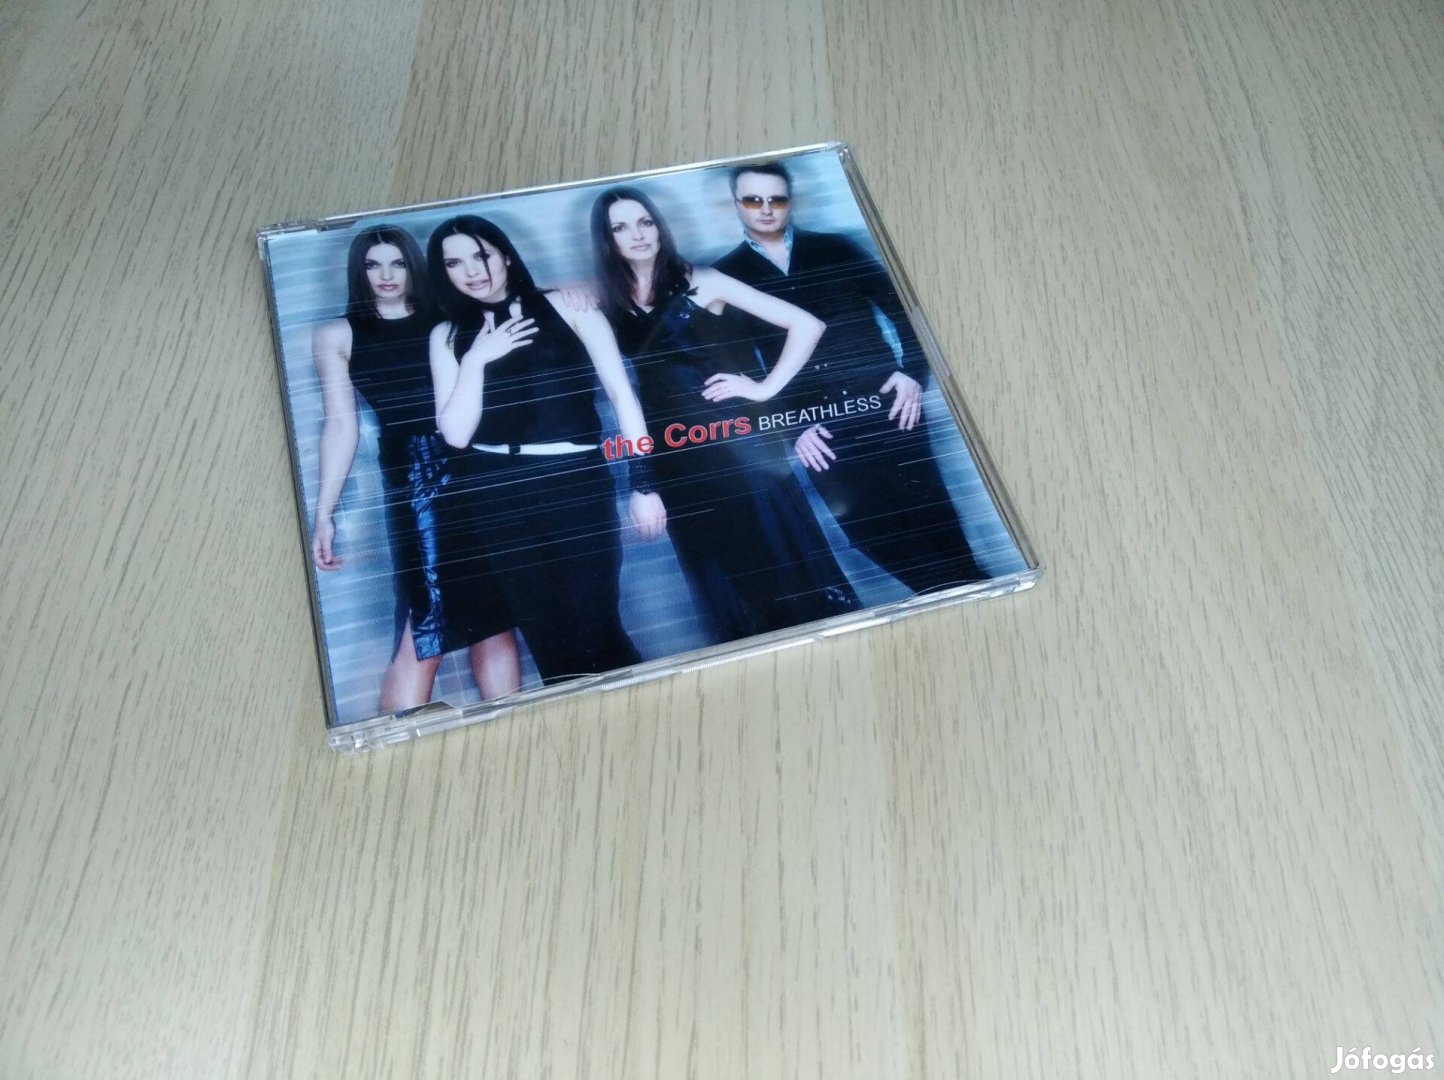 The Corrs - Breathless / Single CD